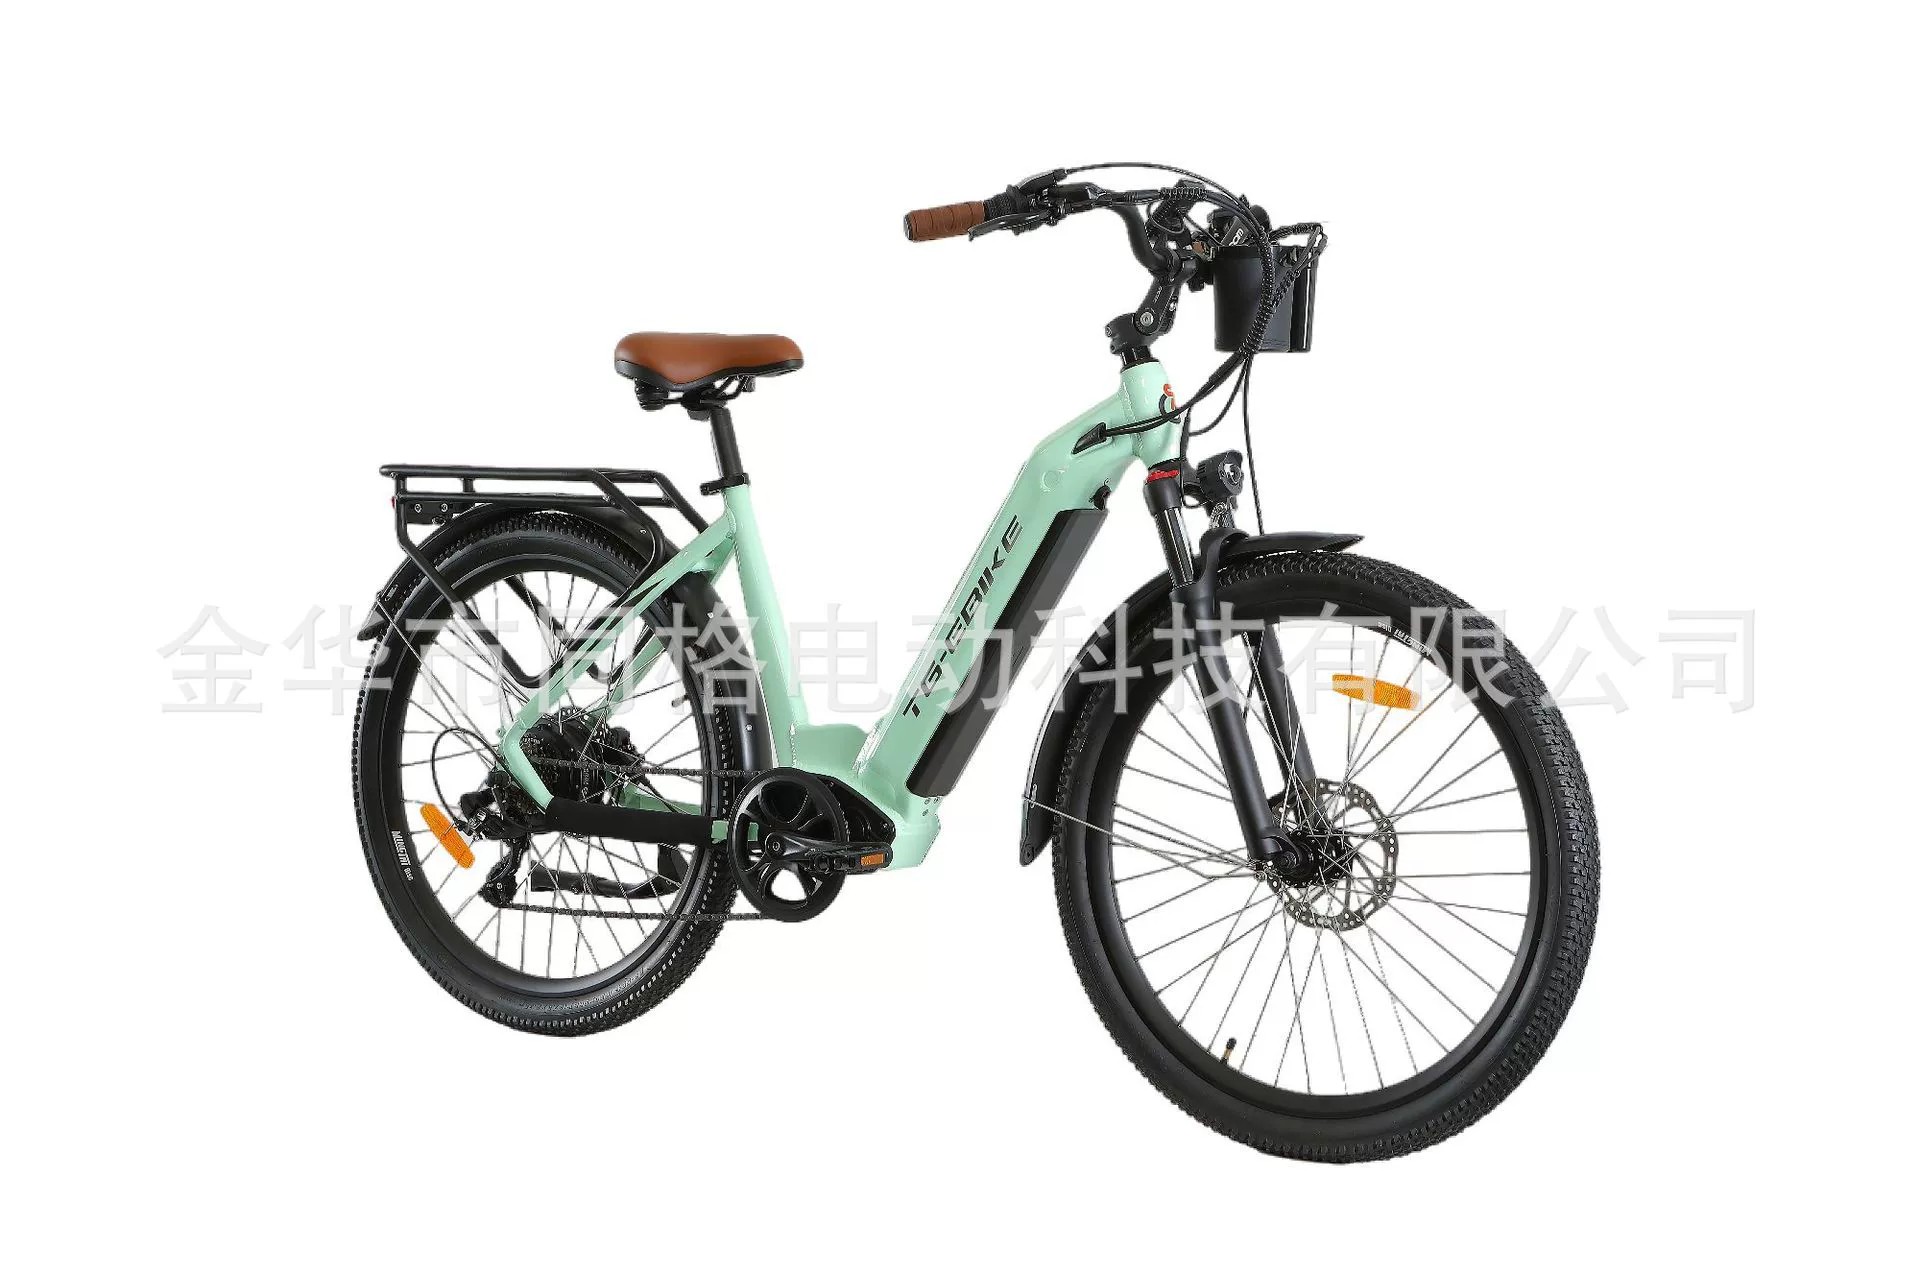 26" 700C electric city bike electric bicycle freestyle bike with rear rack cicy cycle bicycle manufacturer